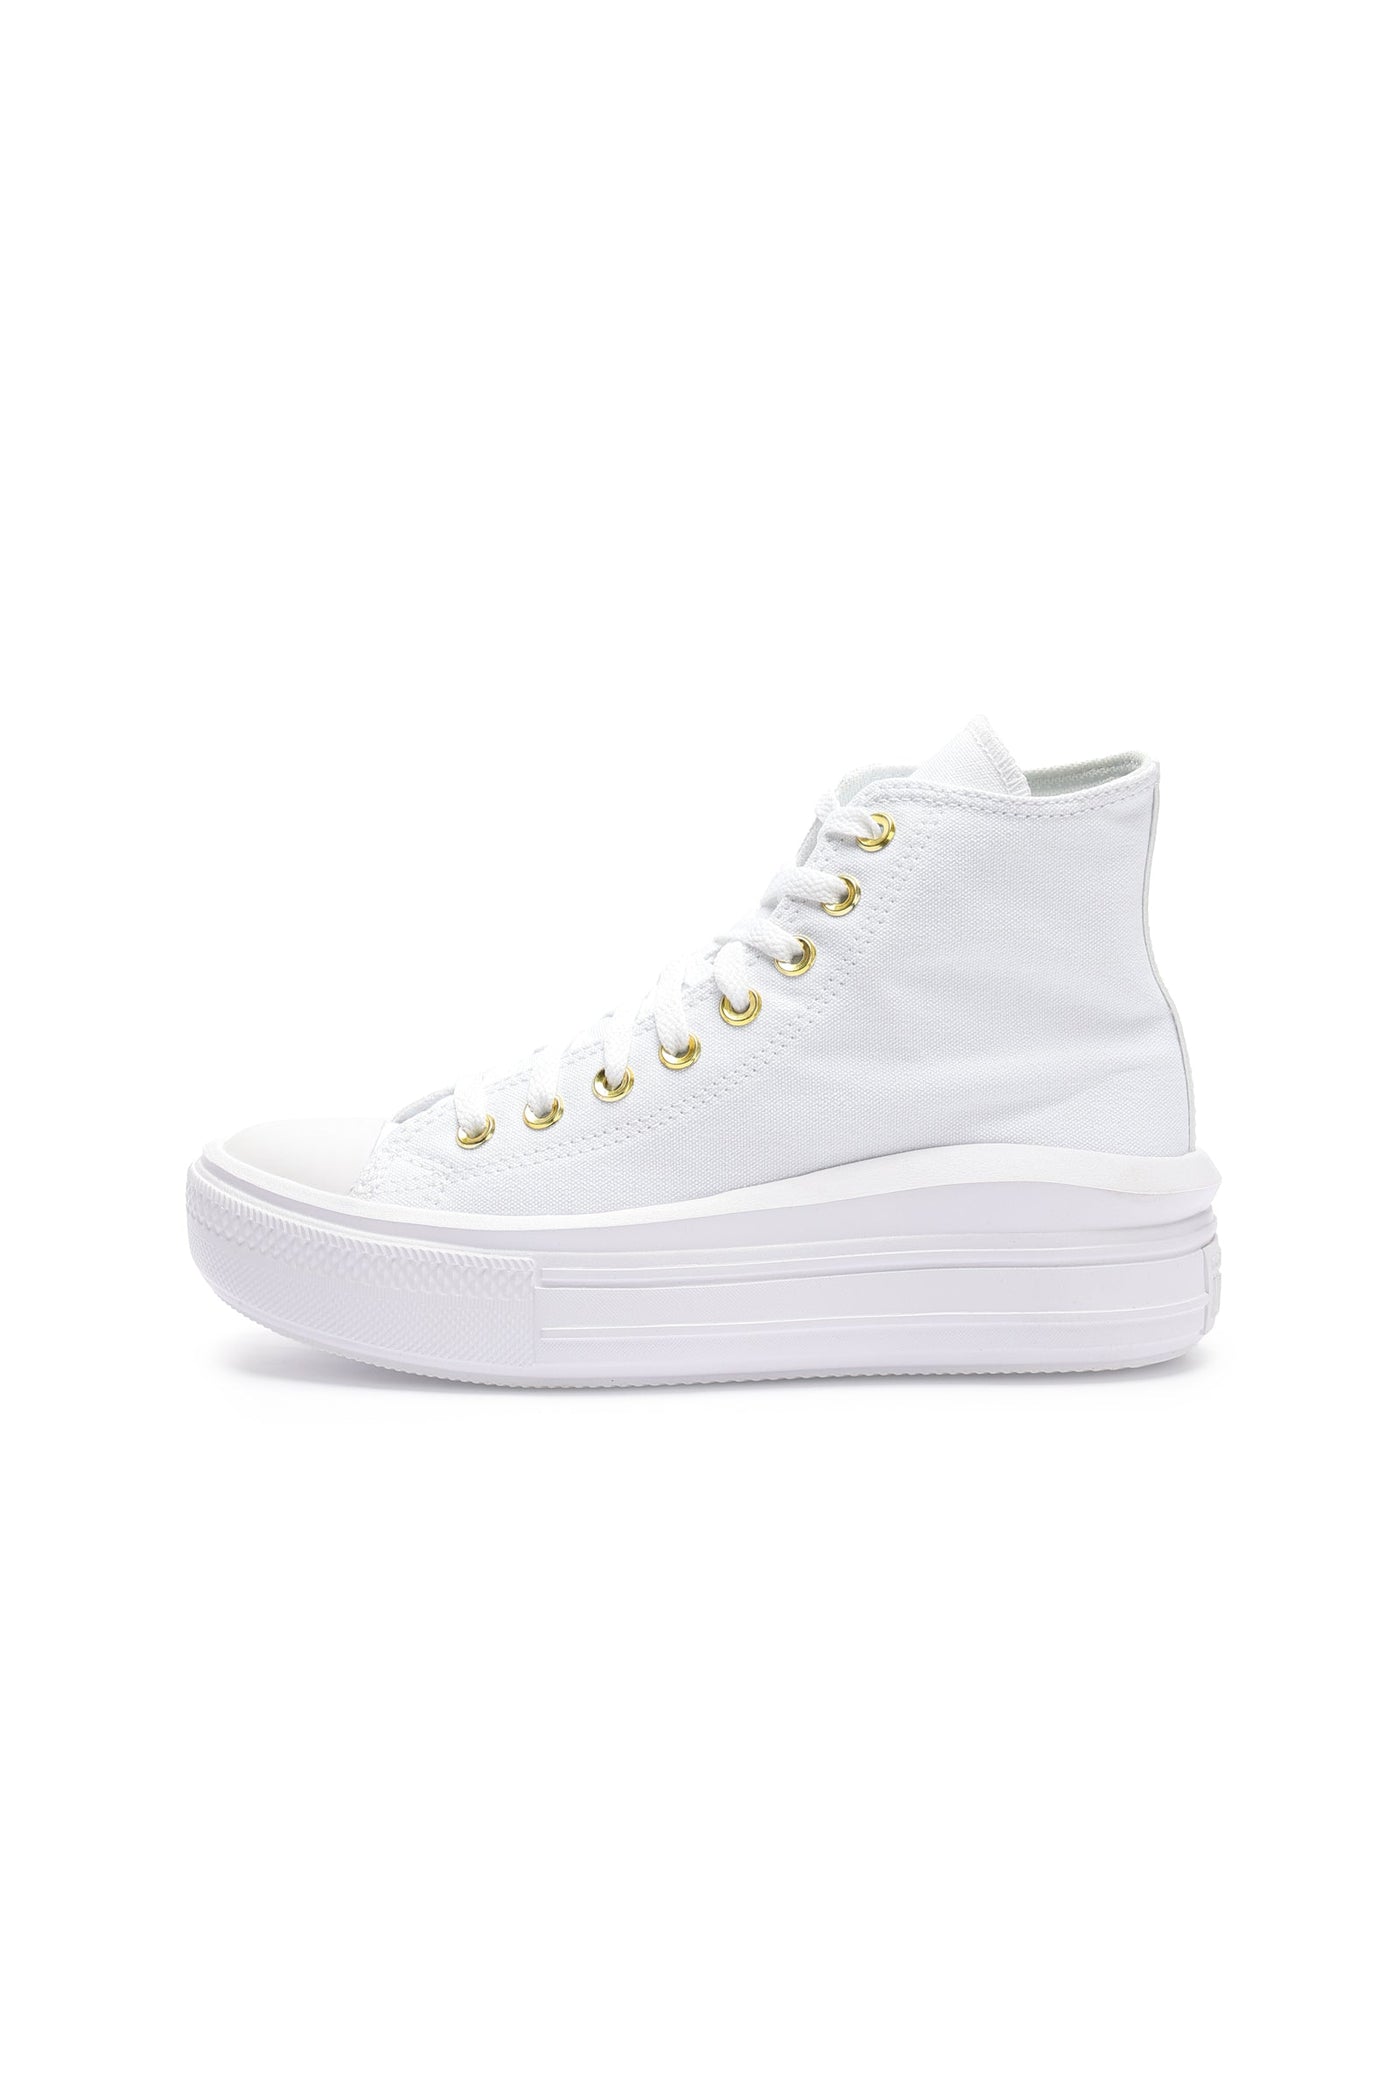 CHUCK TAYLOR ALL STAR MOVE STAR STUDDED Optical White / 39 / Women